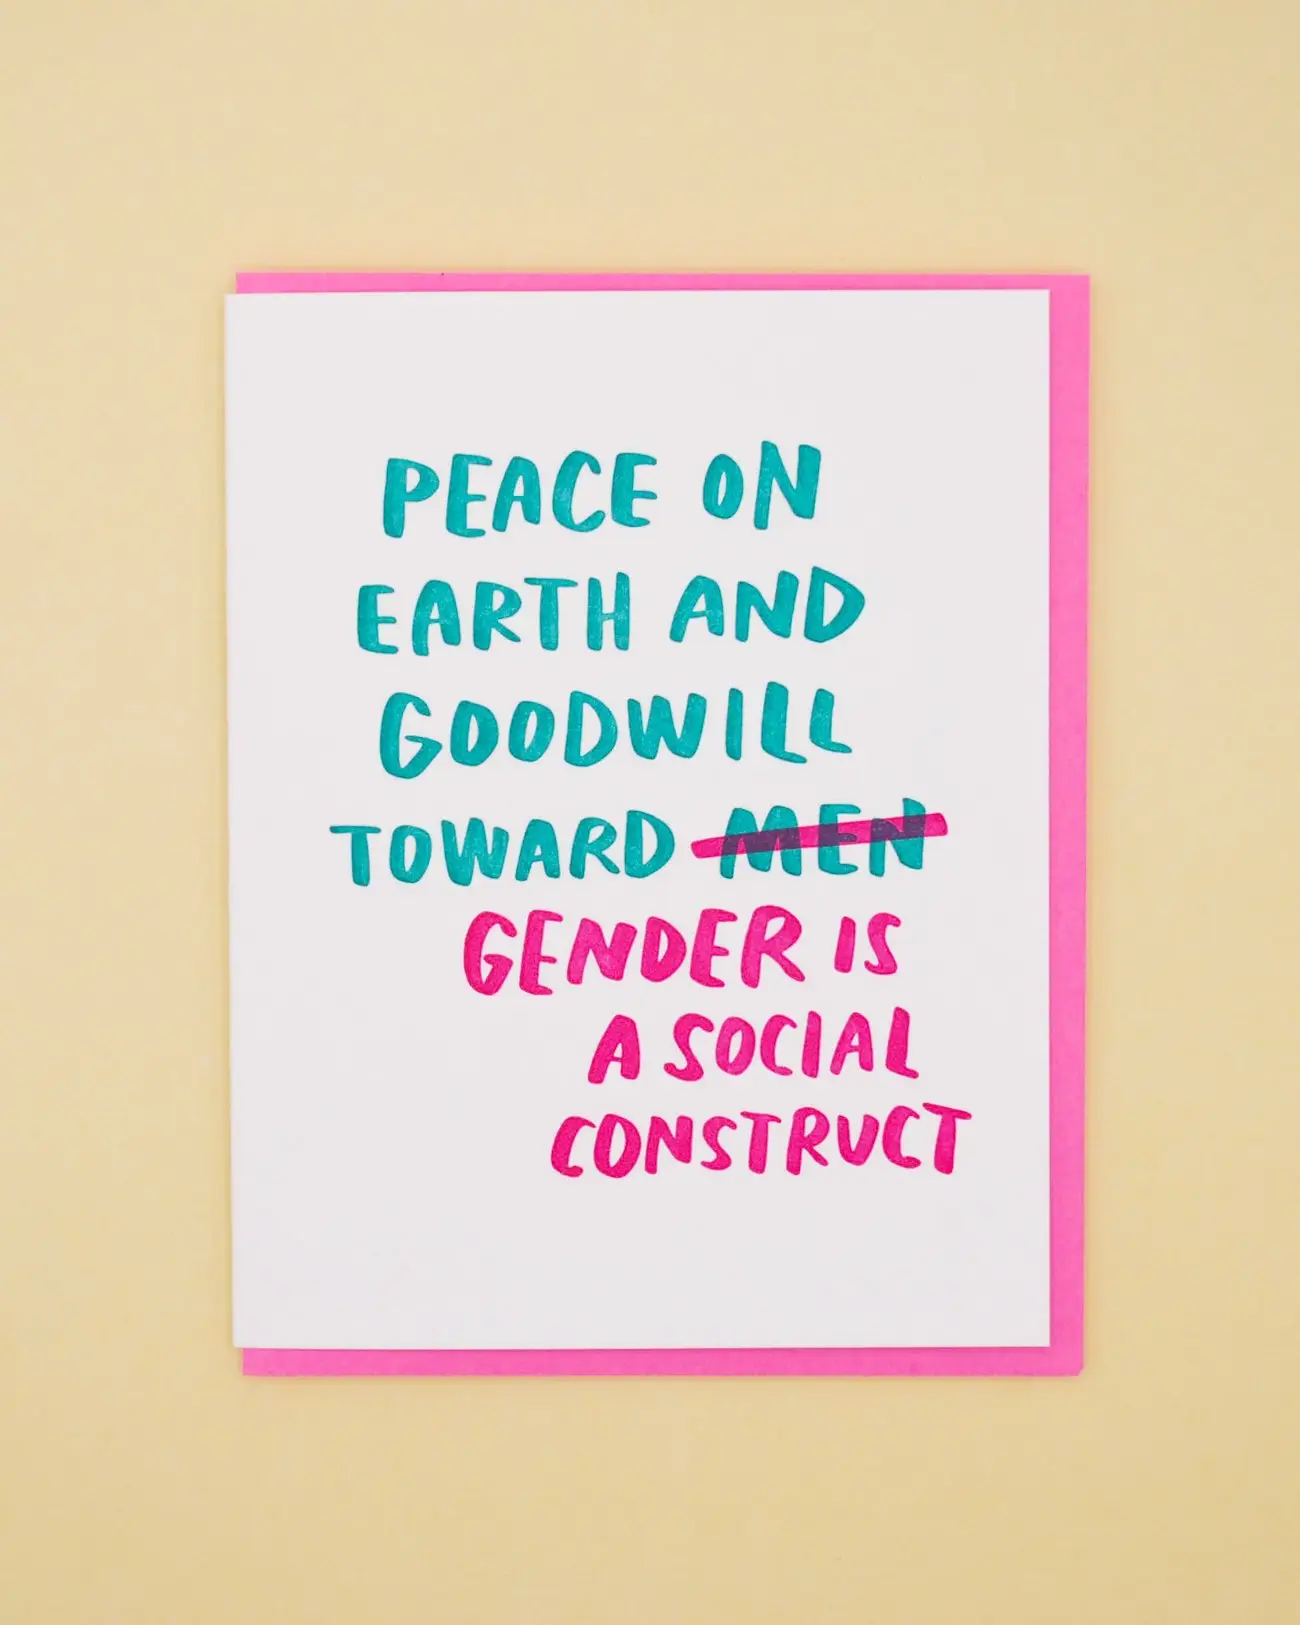 Goodwill/Gender is a Social Construct Card